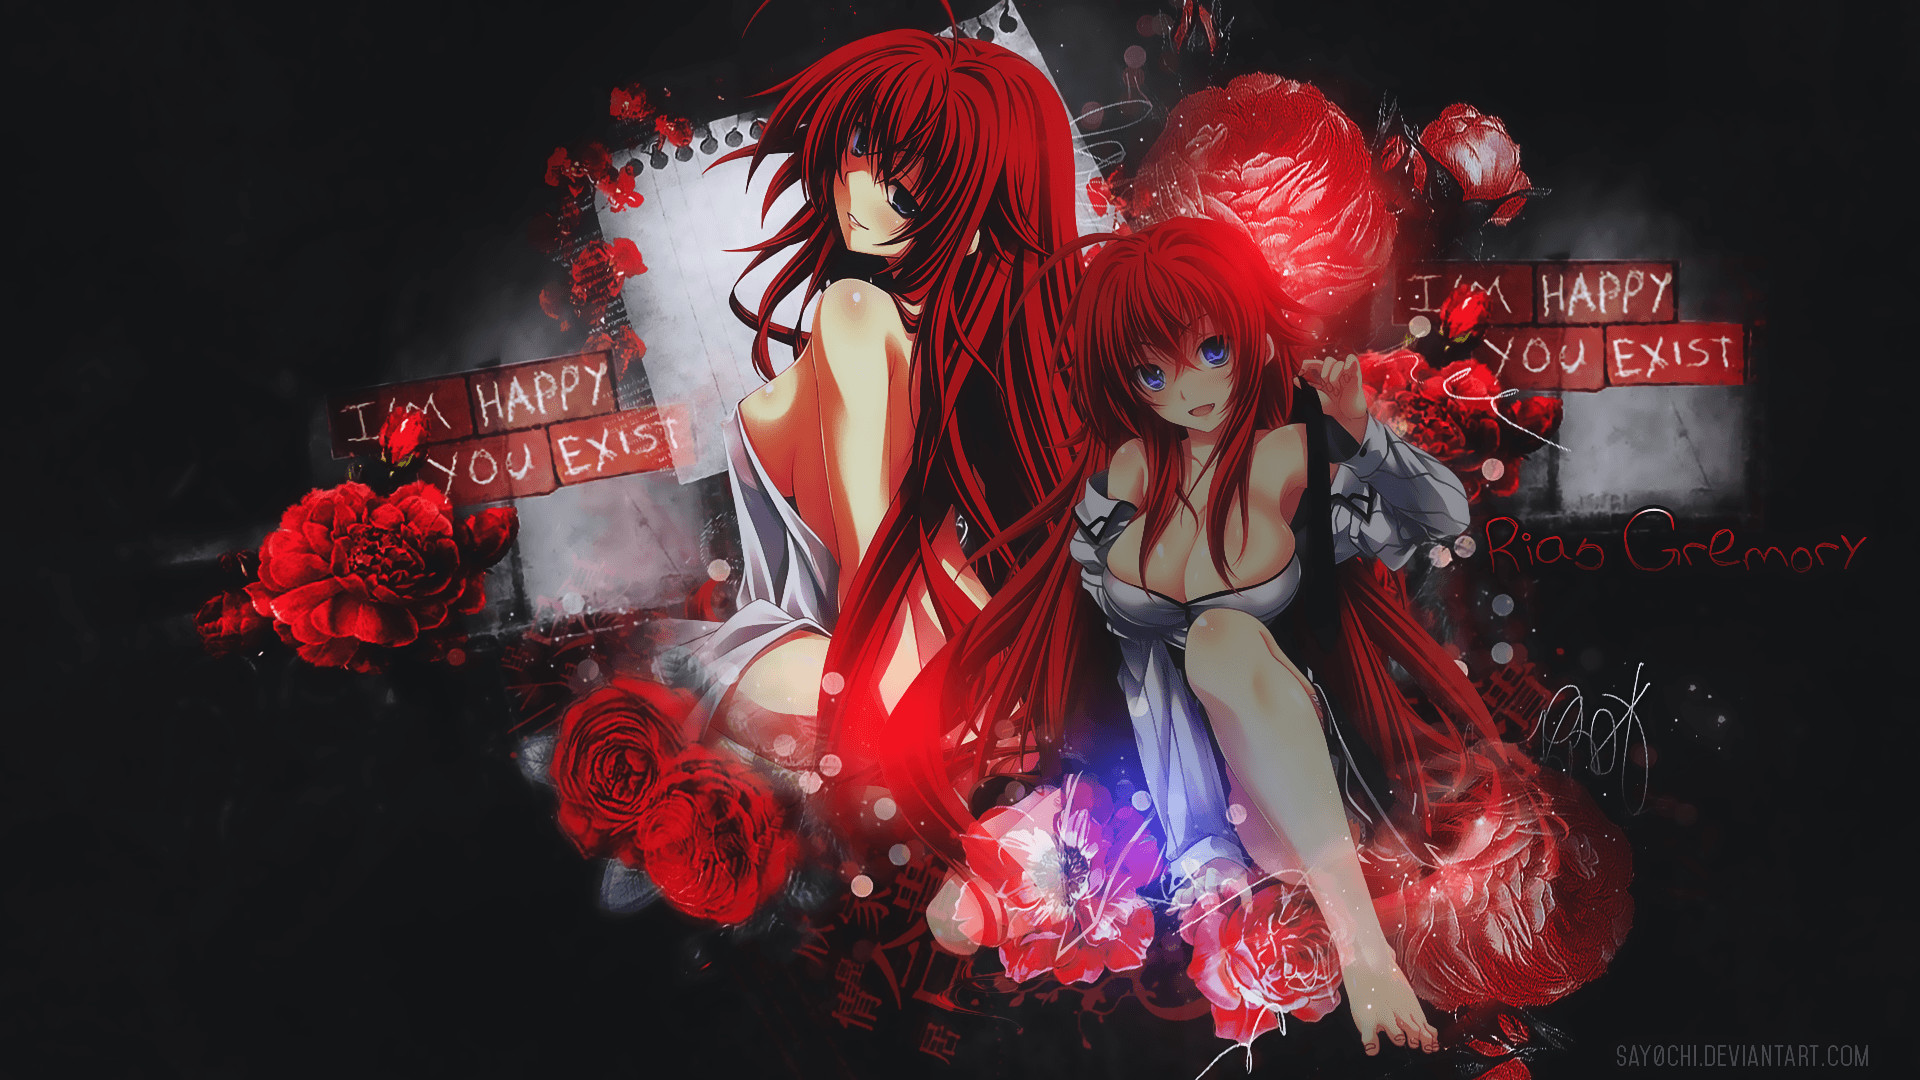 1920x1080 NSFW Two 1080p Rias Gremory Wallpaper I requested on DeviantArt .